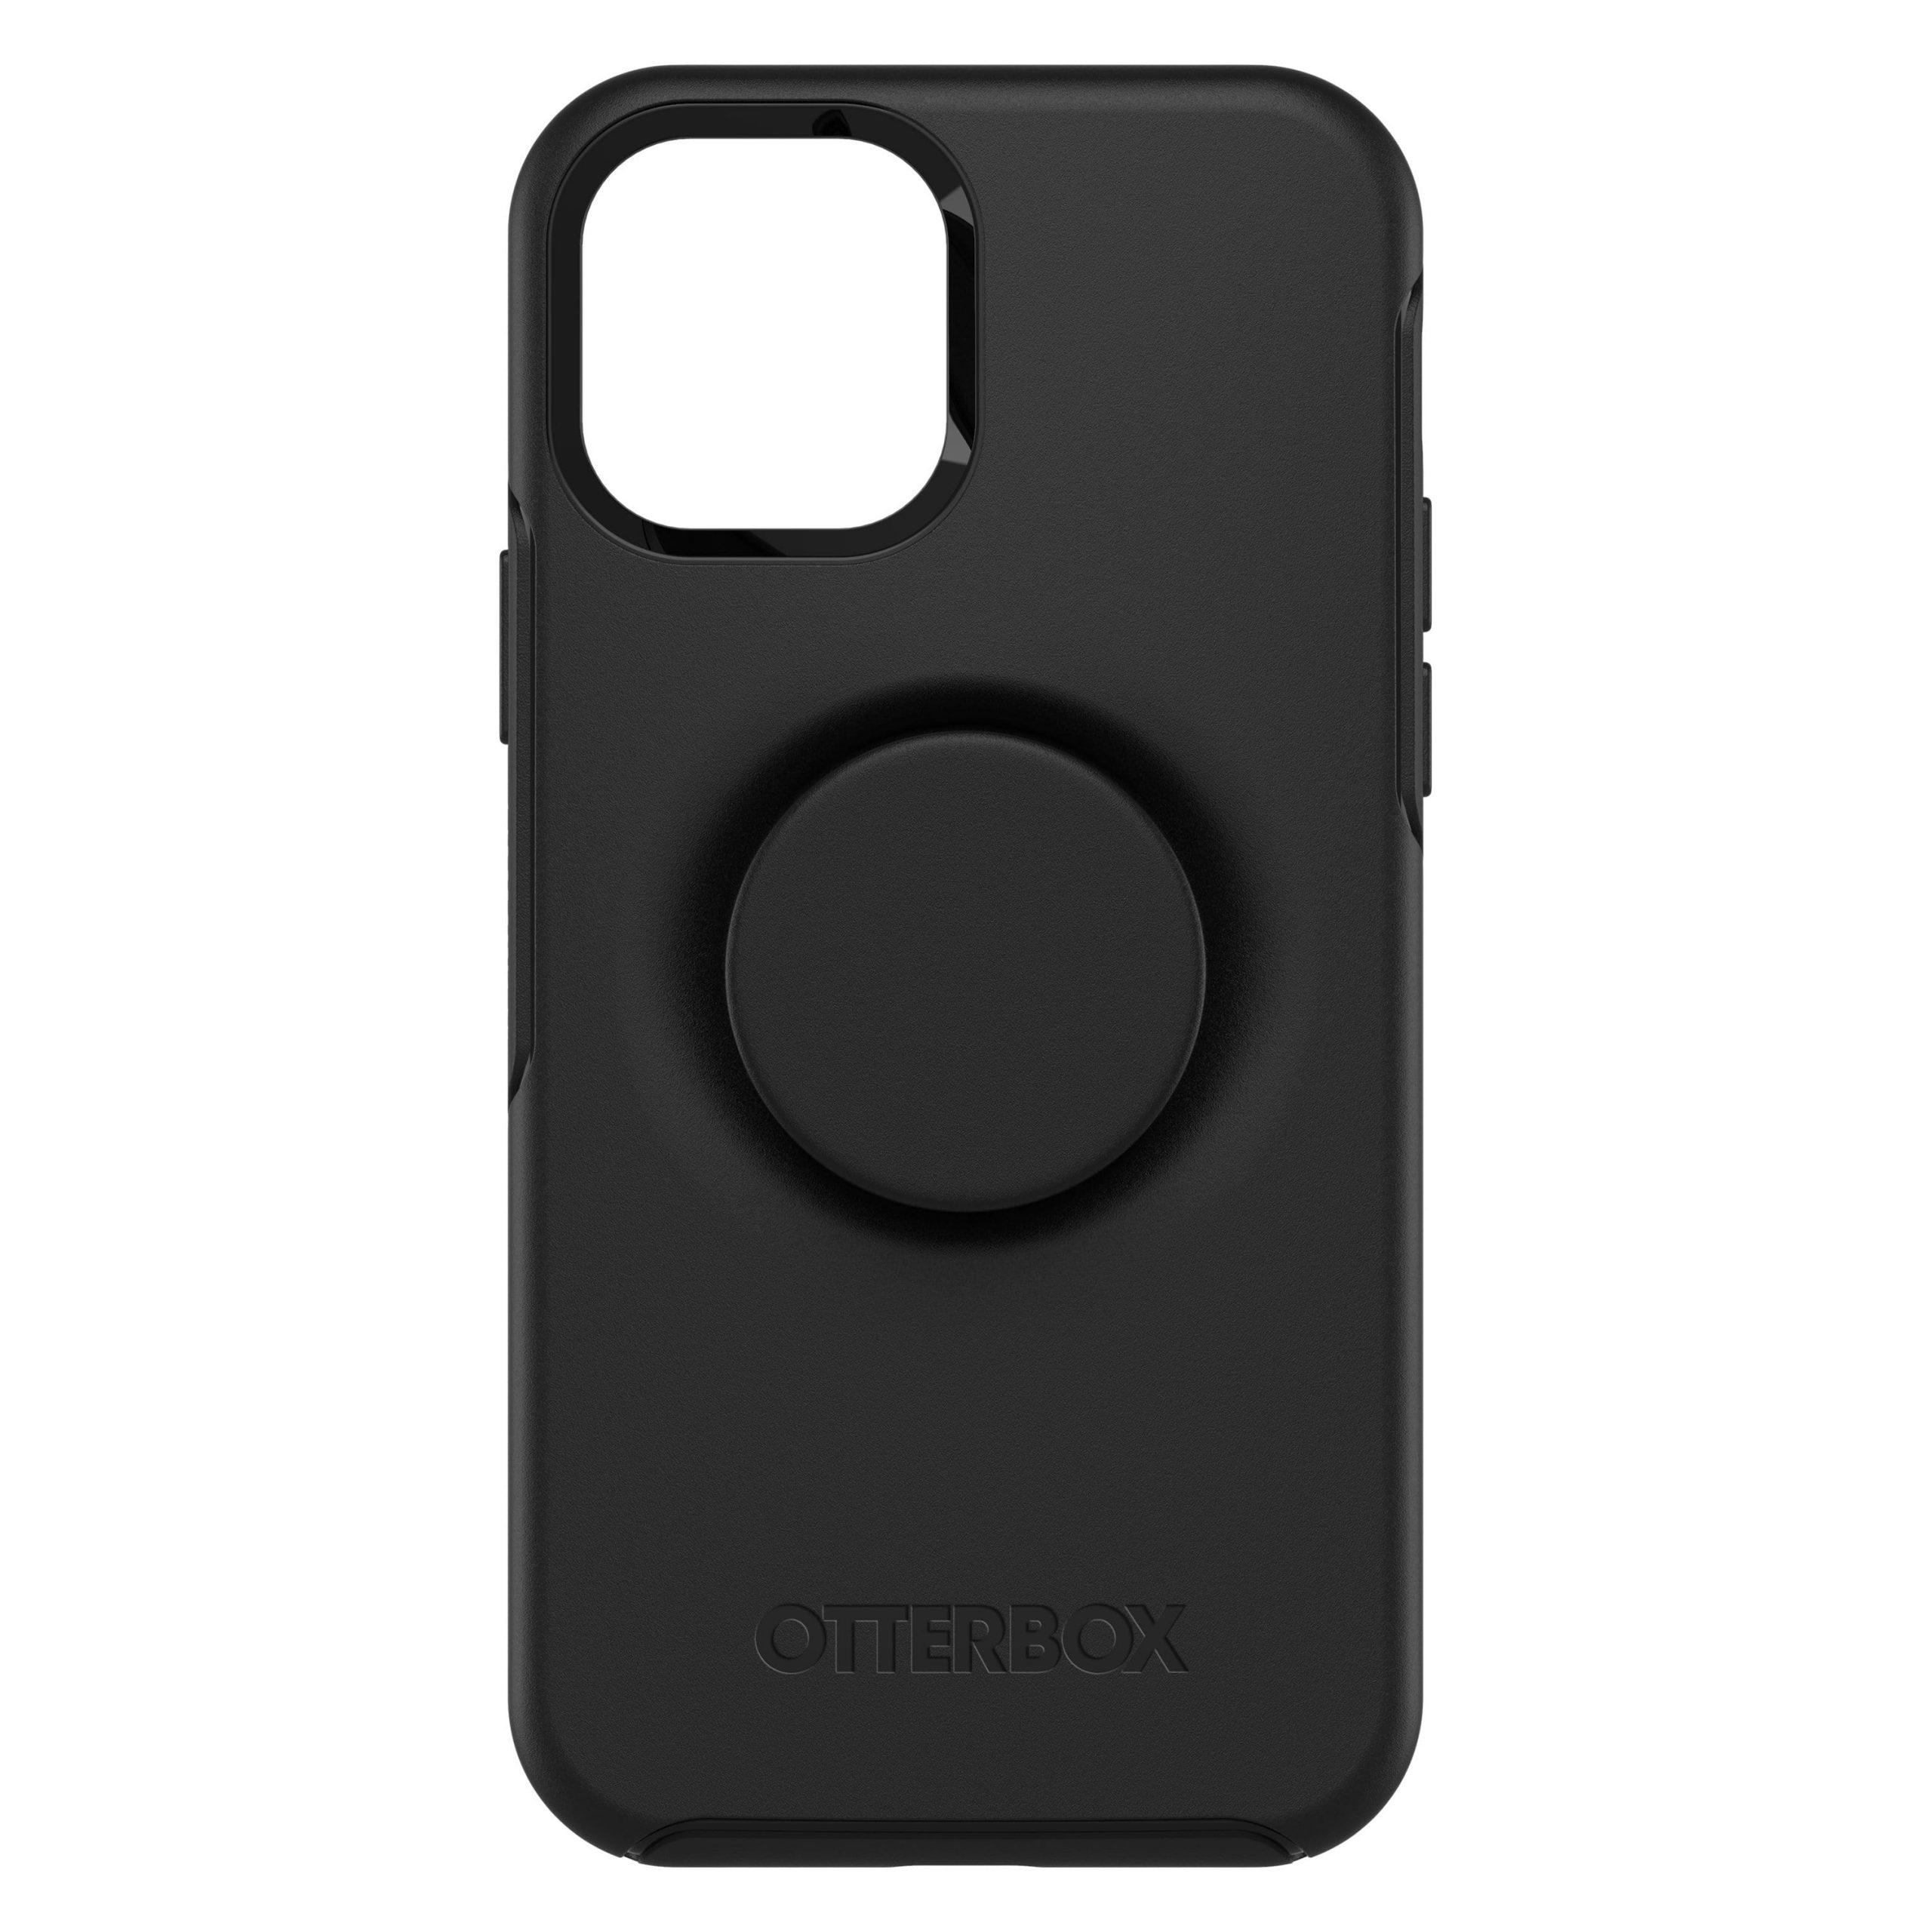 otterbox otter pop symmetry apple iphone 12 12 pro case drop protection cover w popsocket phone holder slim protective selfie case wireless charging compatible black